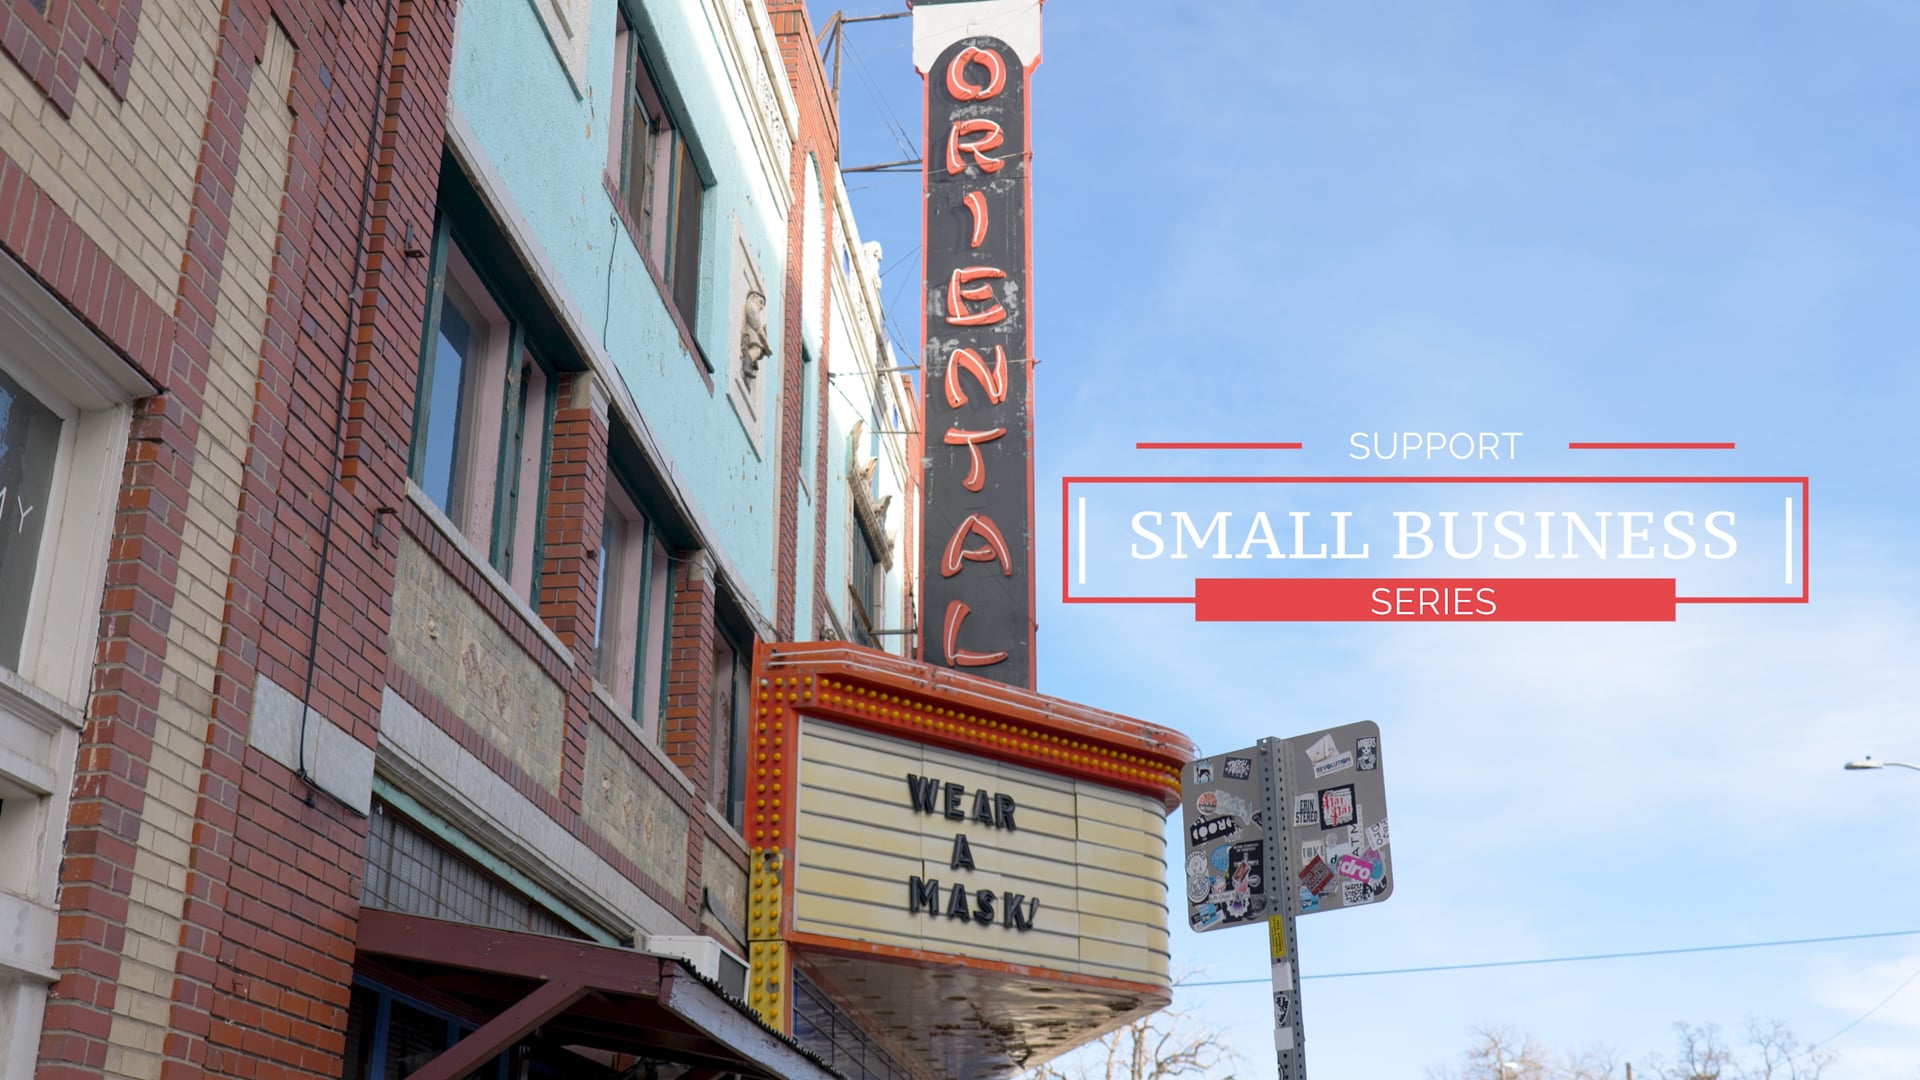 Support Small Business Series - The Oriental Theater